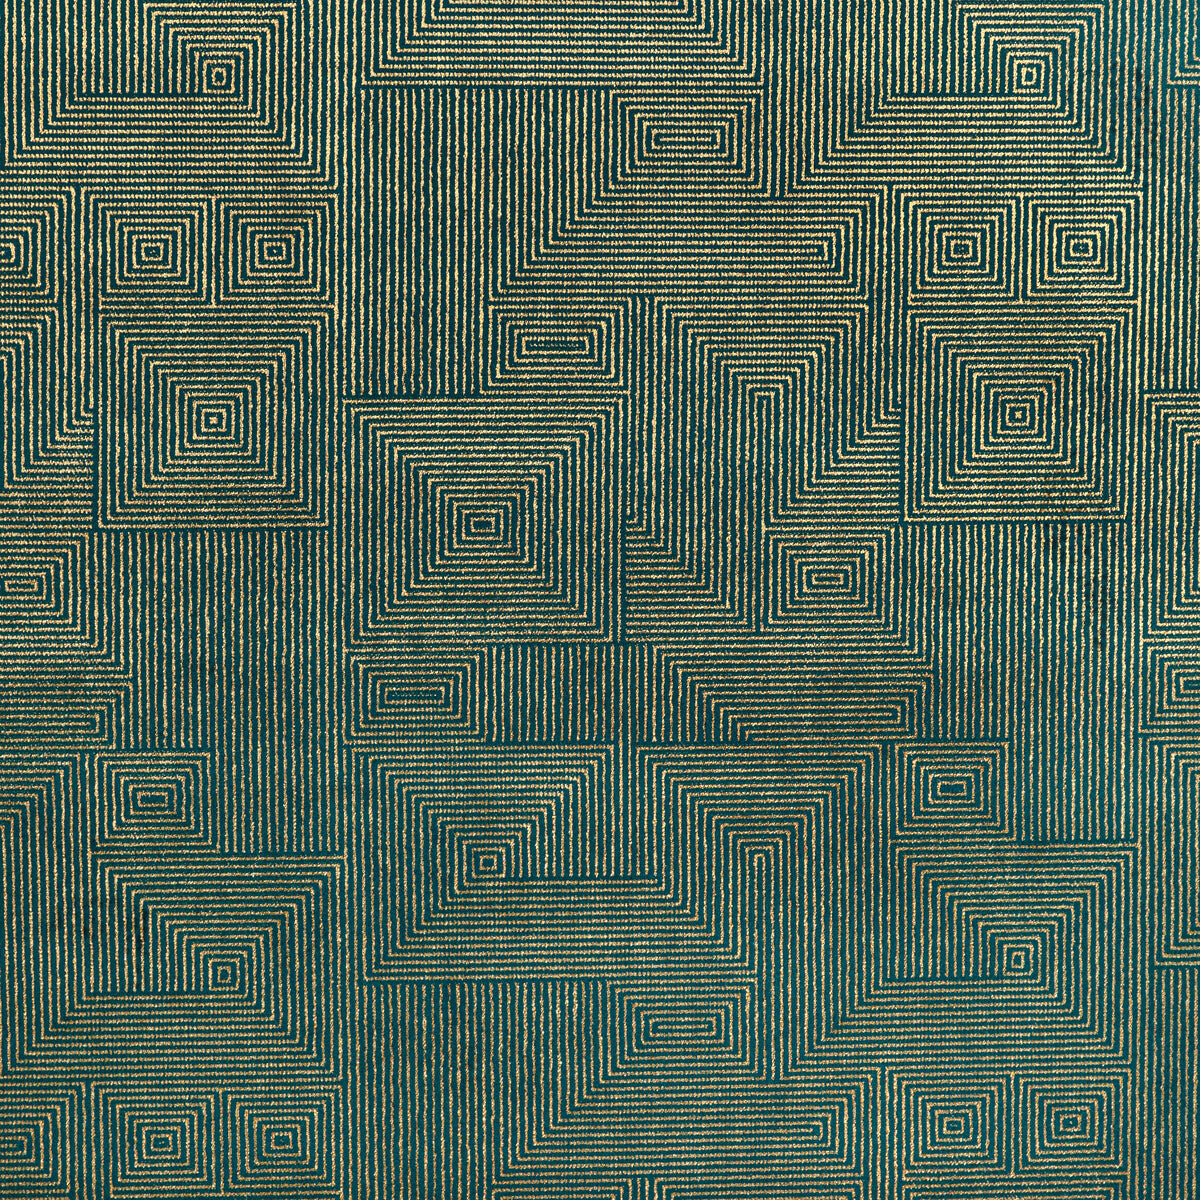 New Order fabric in malachite color - pattern 36043.35.0 - by Kravet Contract